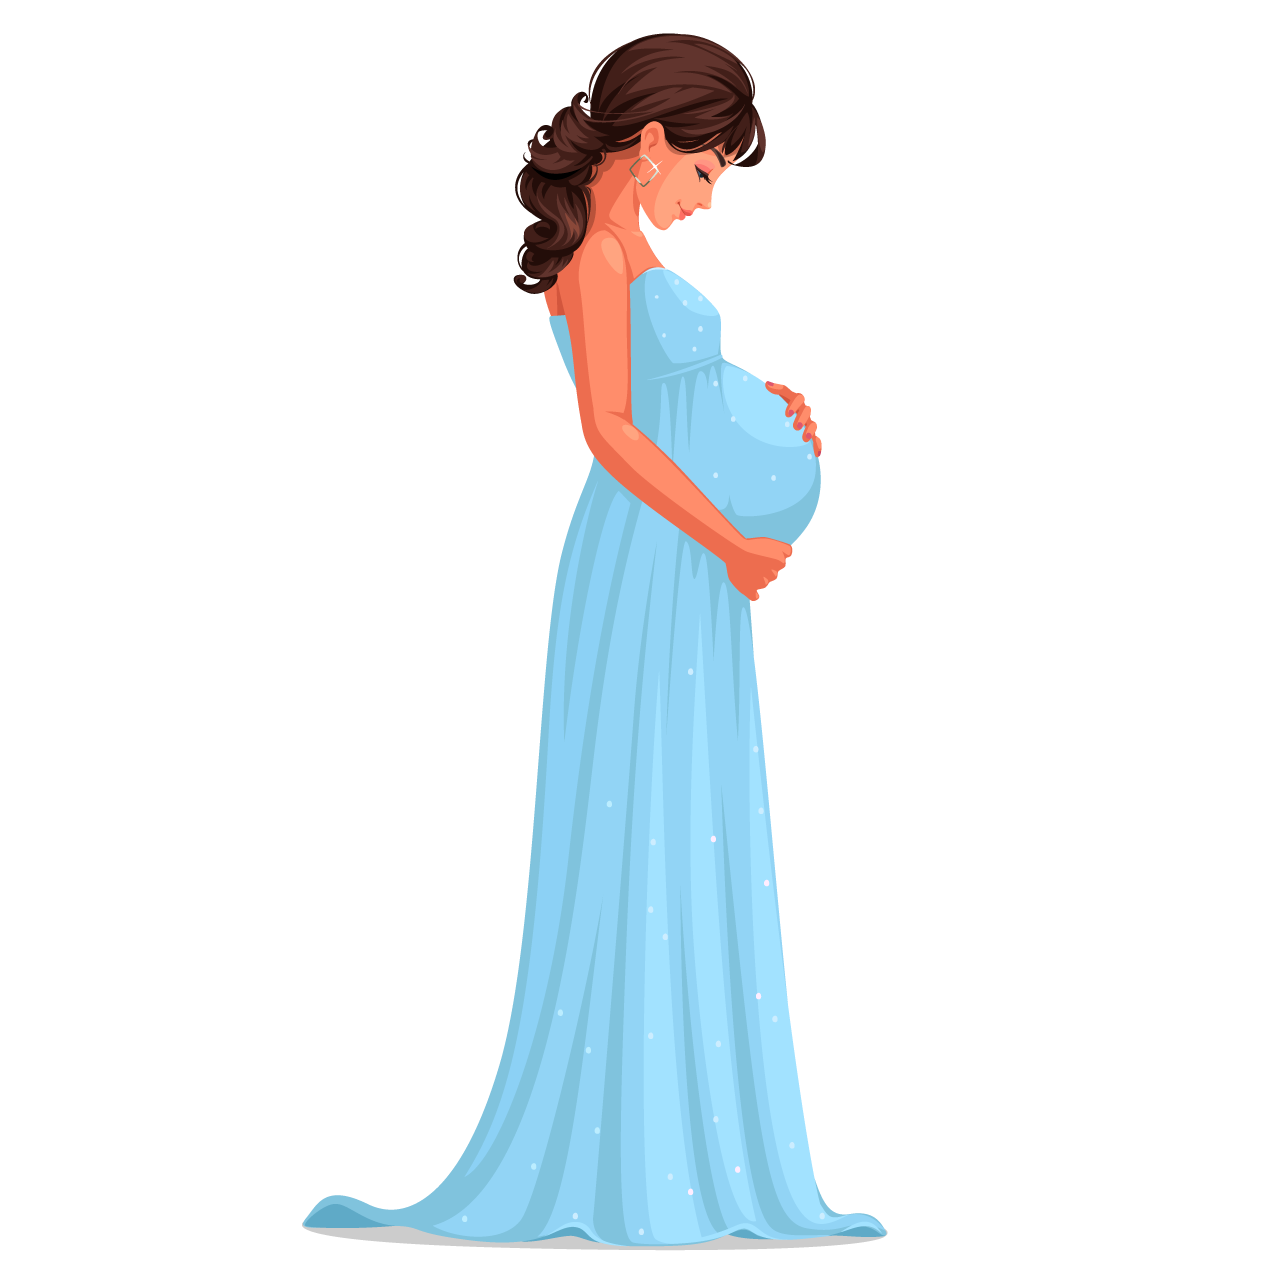 Pregnant female wearing long sky blue dress holding her belly